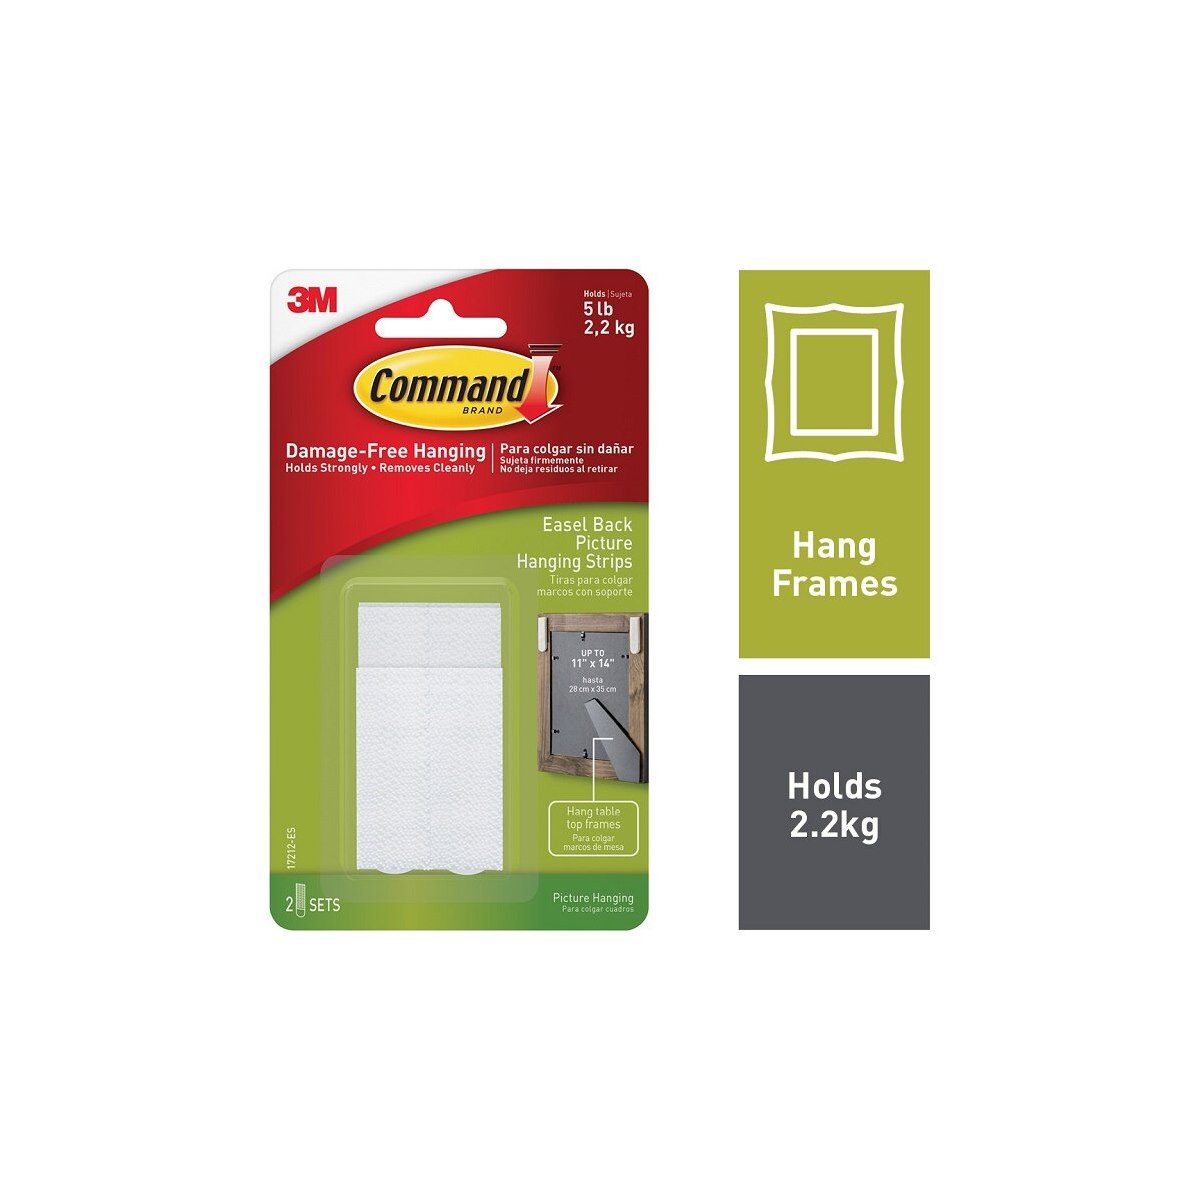 Command Easel Back Picture Hanging Strips